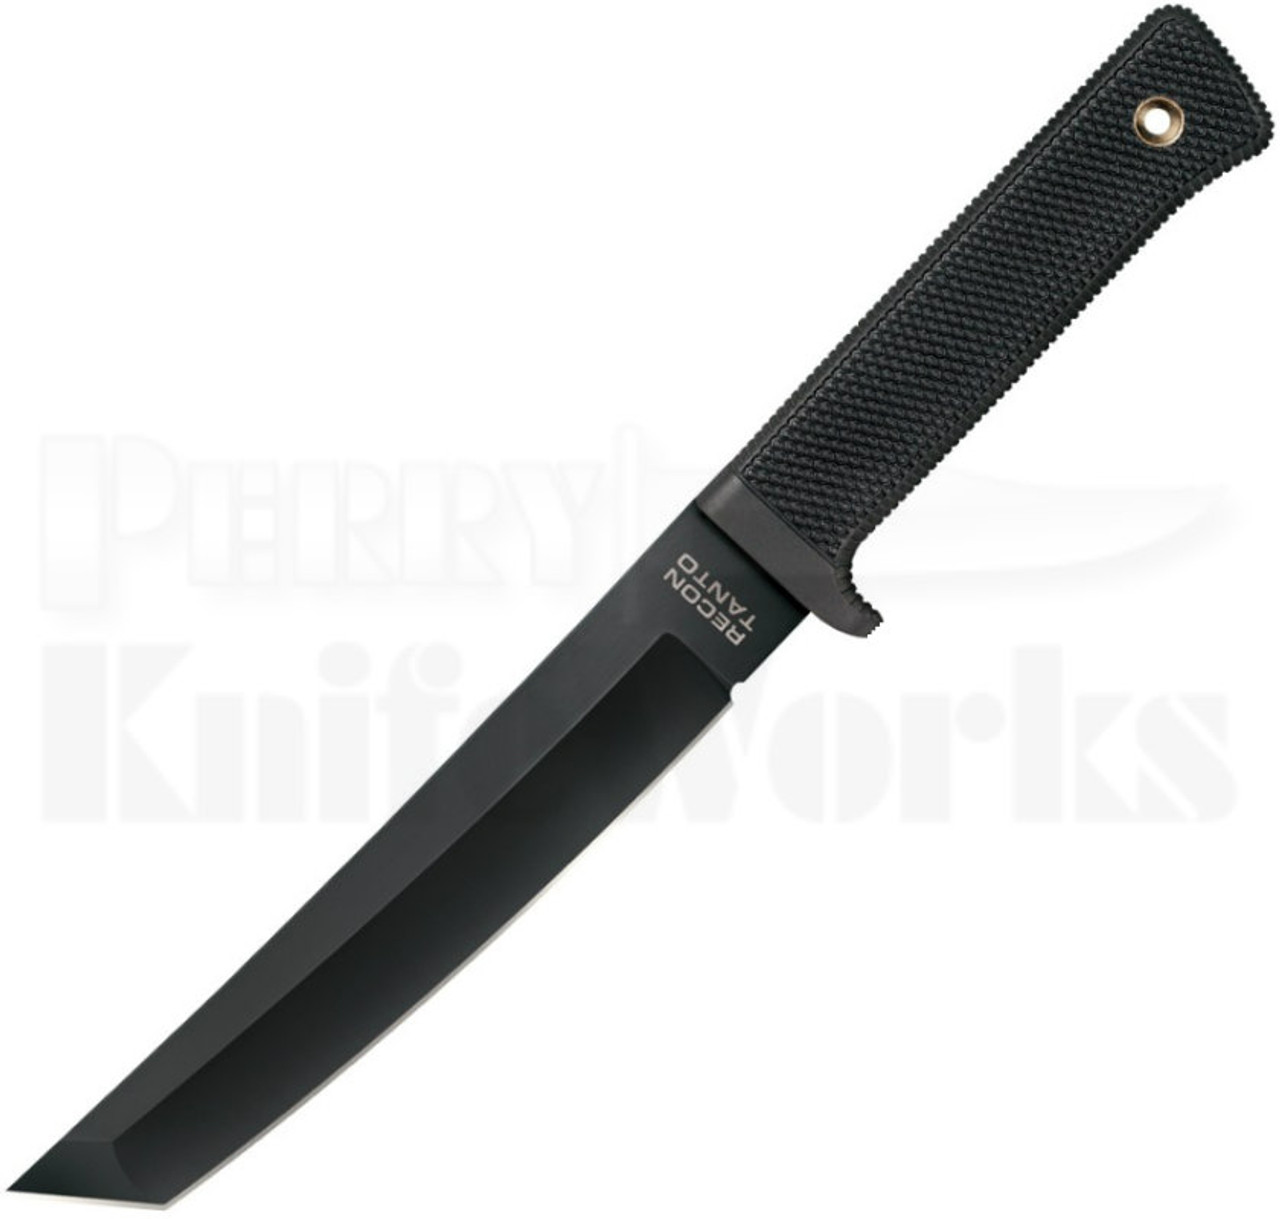 Cold Steel 49LRTZ Recon Tanto Fixed Blade Knife SK-5